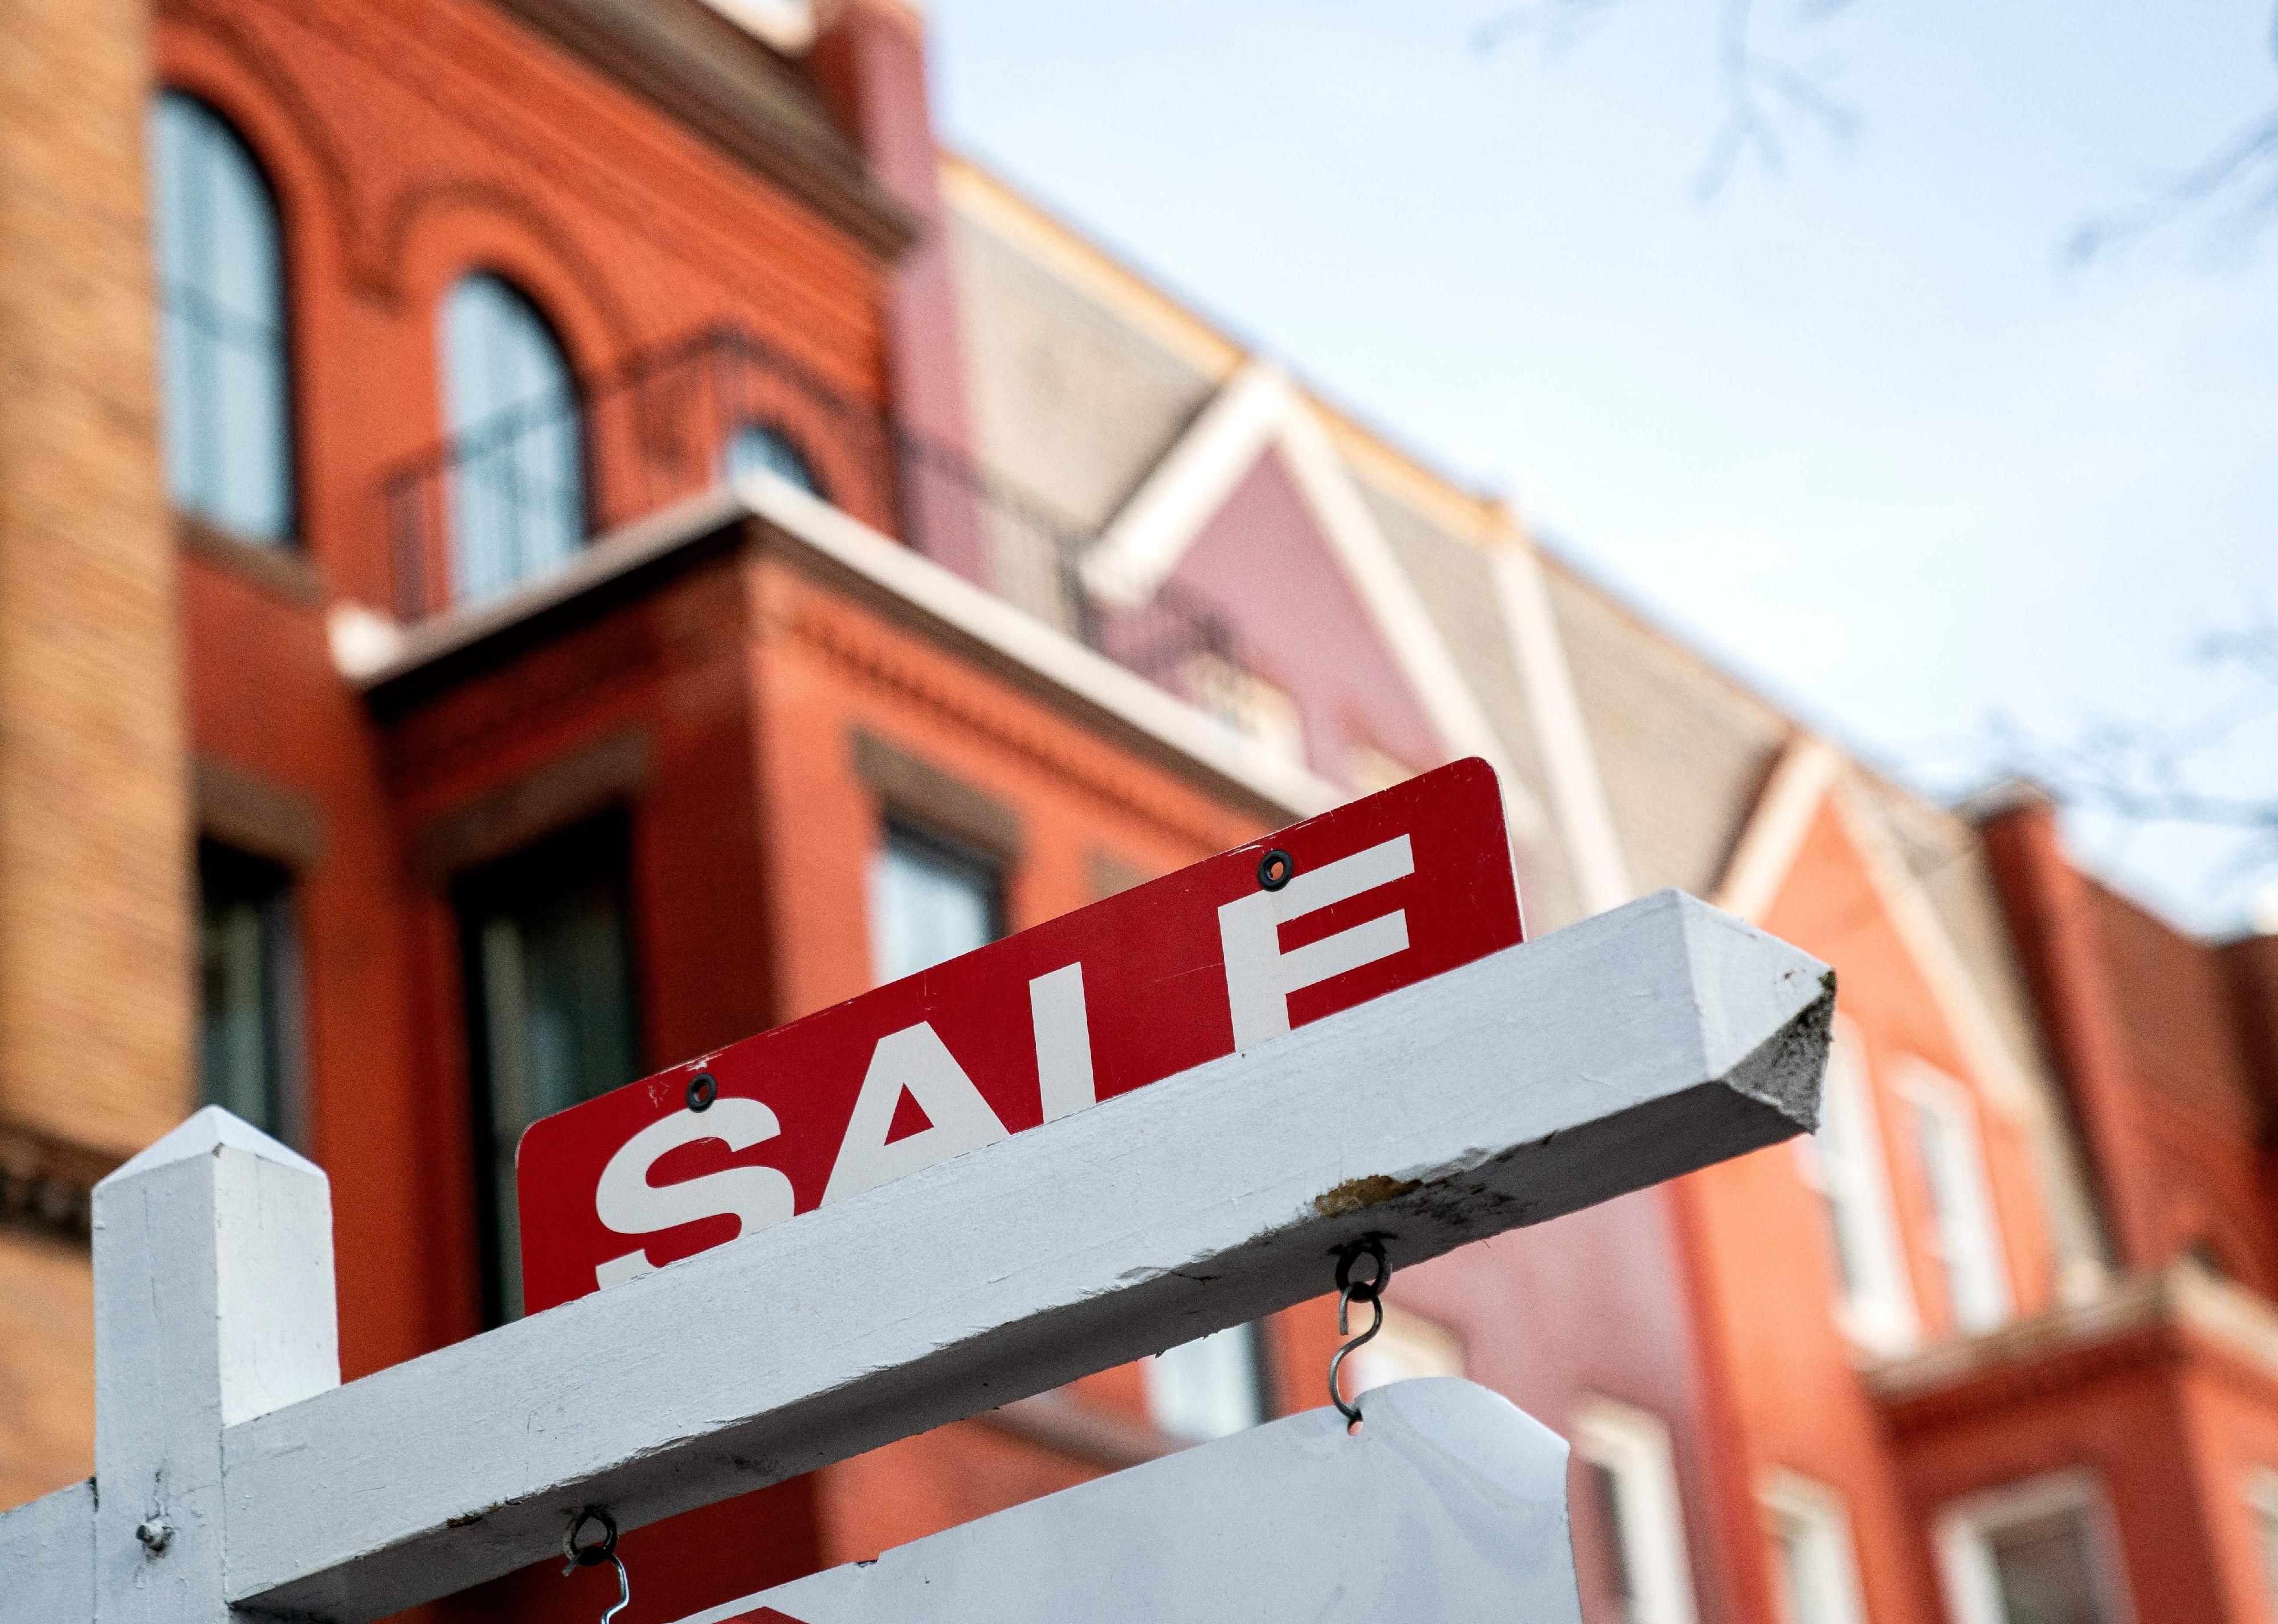 A For Sale sign is displayed in front of a house in Washington D.C.